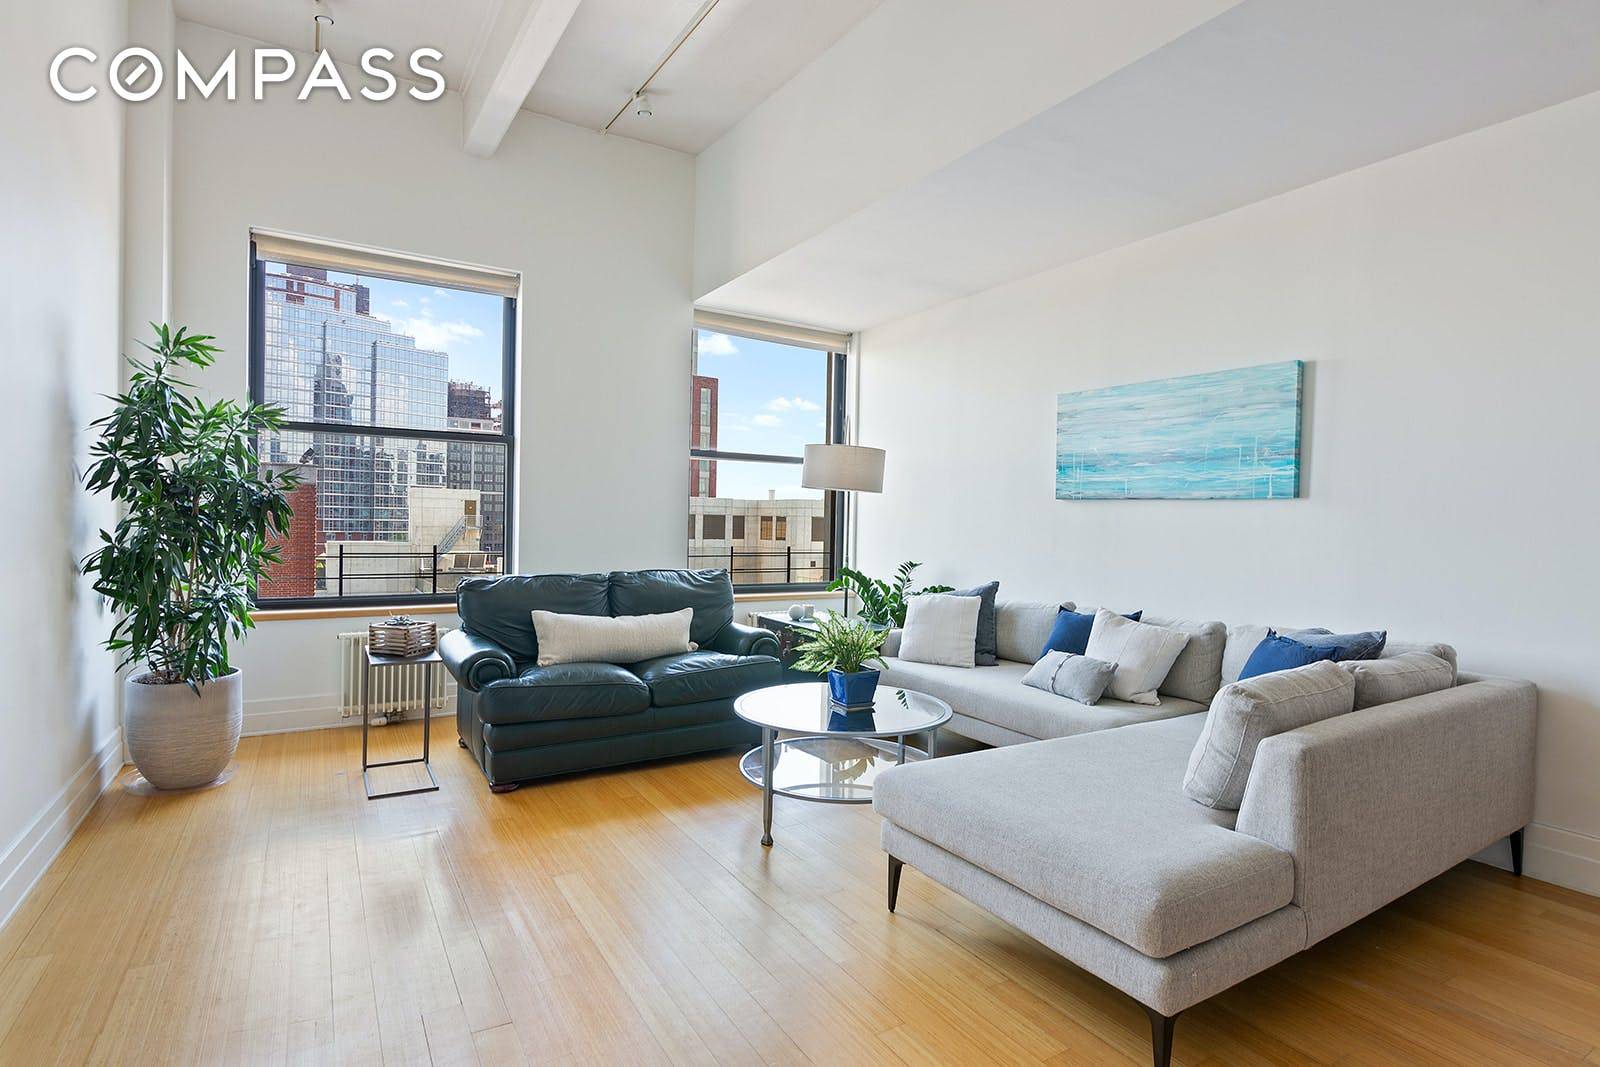 Residence 12T at 70 Washington Street is a chic and spacious loft with a home office in one of DUMBOs most coveted buildings.